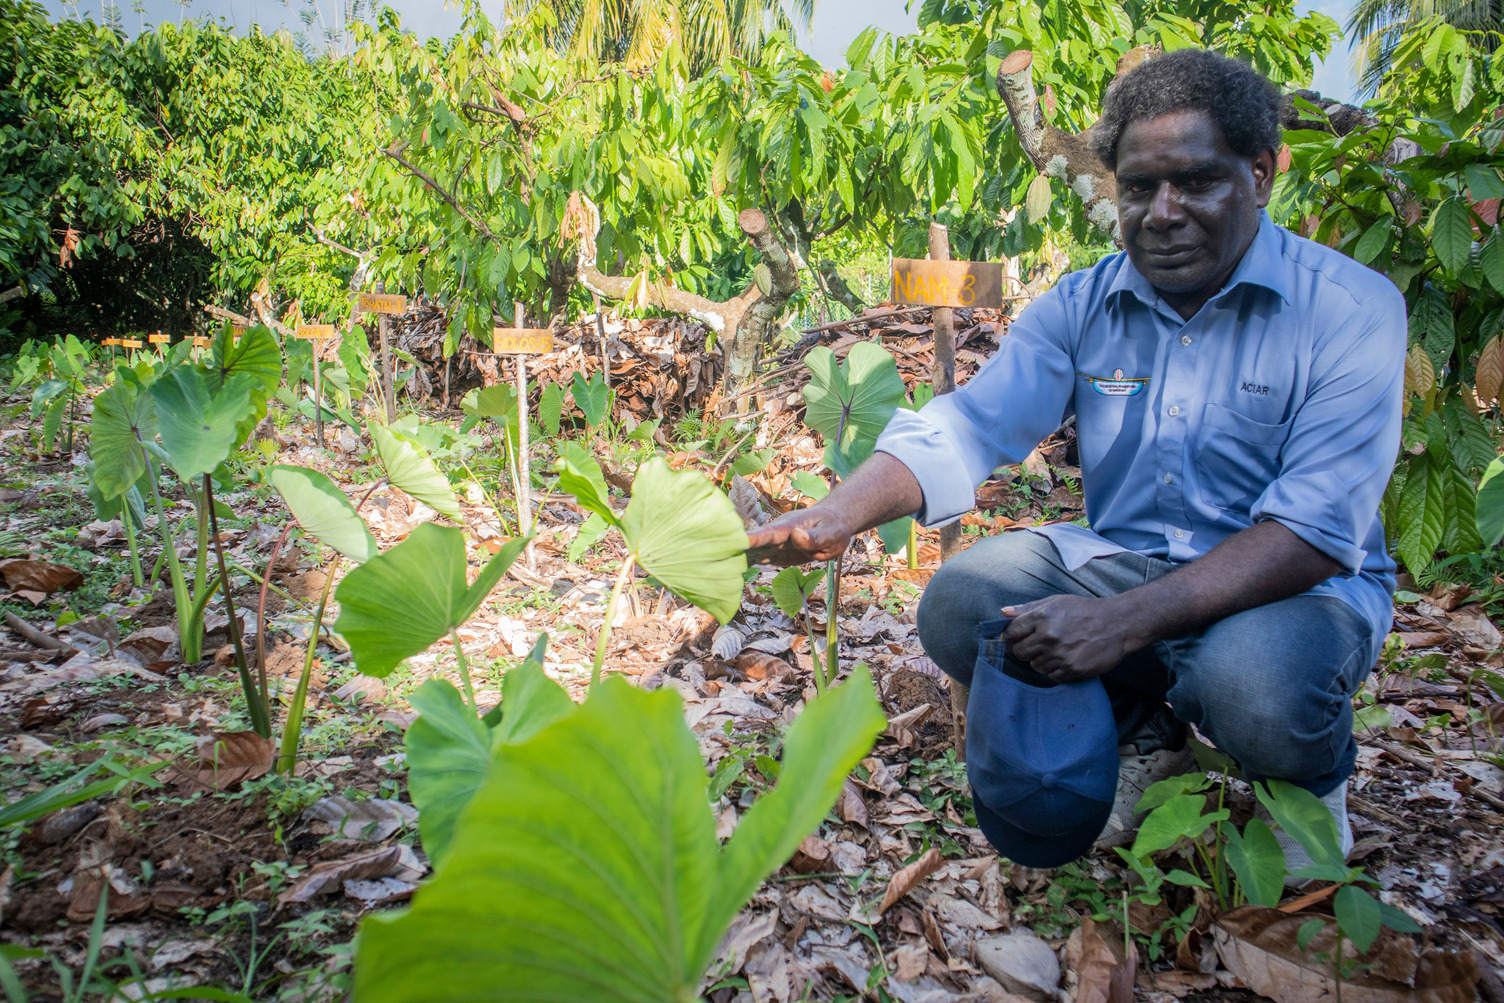 ARSF recipient James Butubu tending to his Taro trials in Bougainville. The trials involved observation and documentation of the characteristics of taro and the difference between those grown among cocoa trees and those grown in the usual open sunlight garden. The research has enabled James to establish a cocoa and food crop integrated farming system model, to help improve food security in Bougainville and PNG.